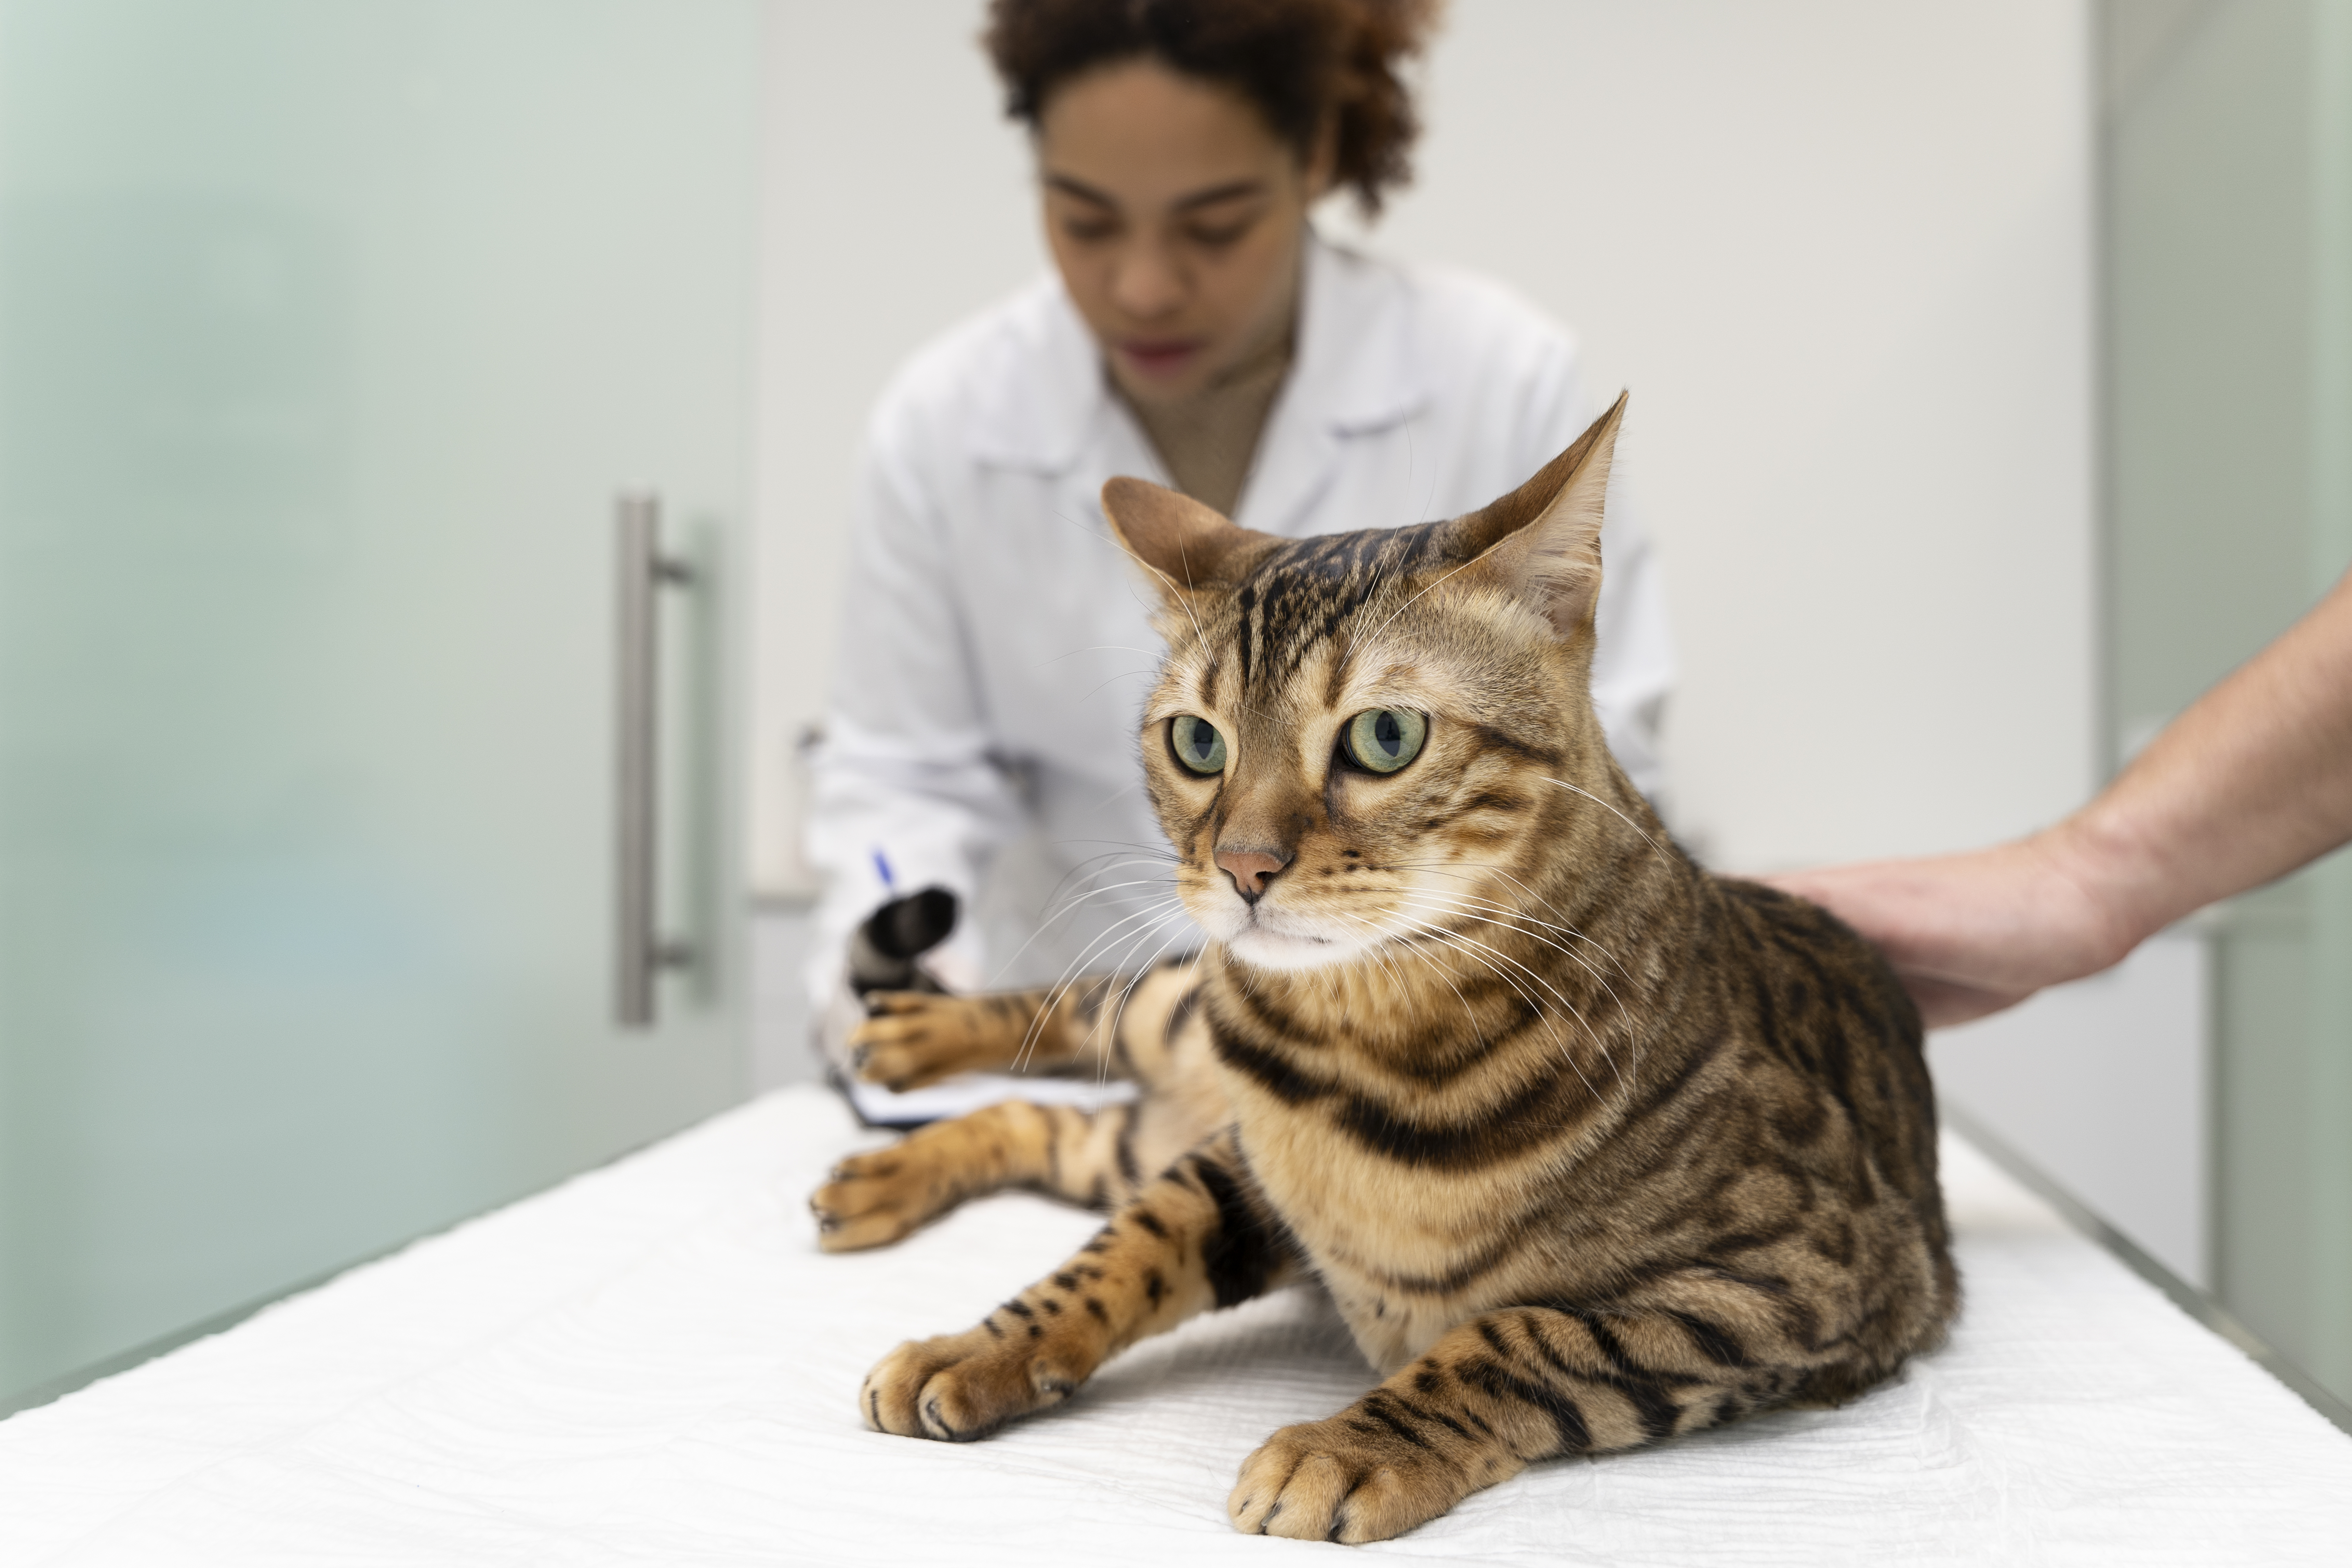 Close-up of a veterinarian assisting a cat - a representation of the high vet costs and expensive vet bills in New Zealand.